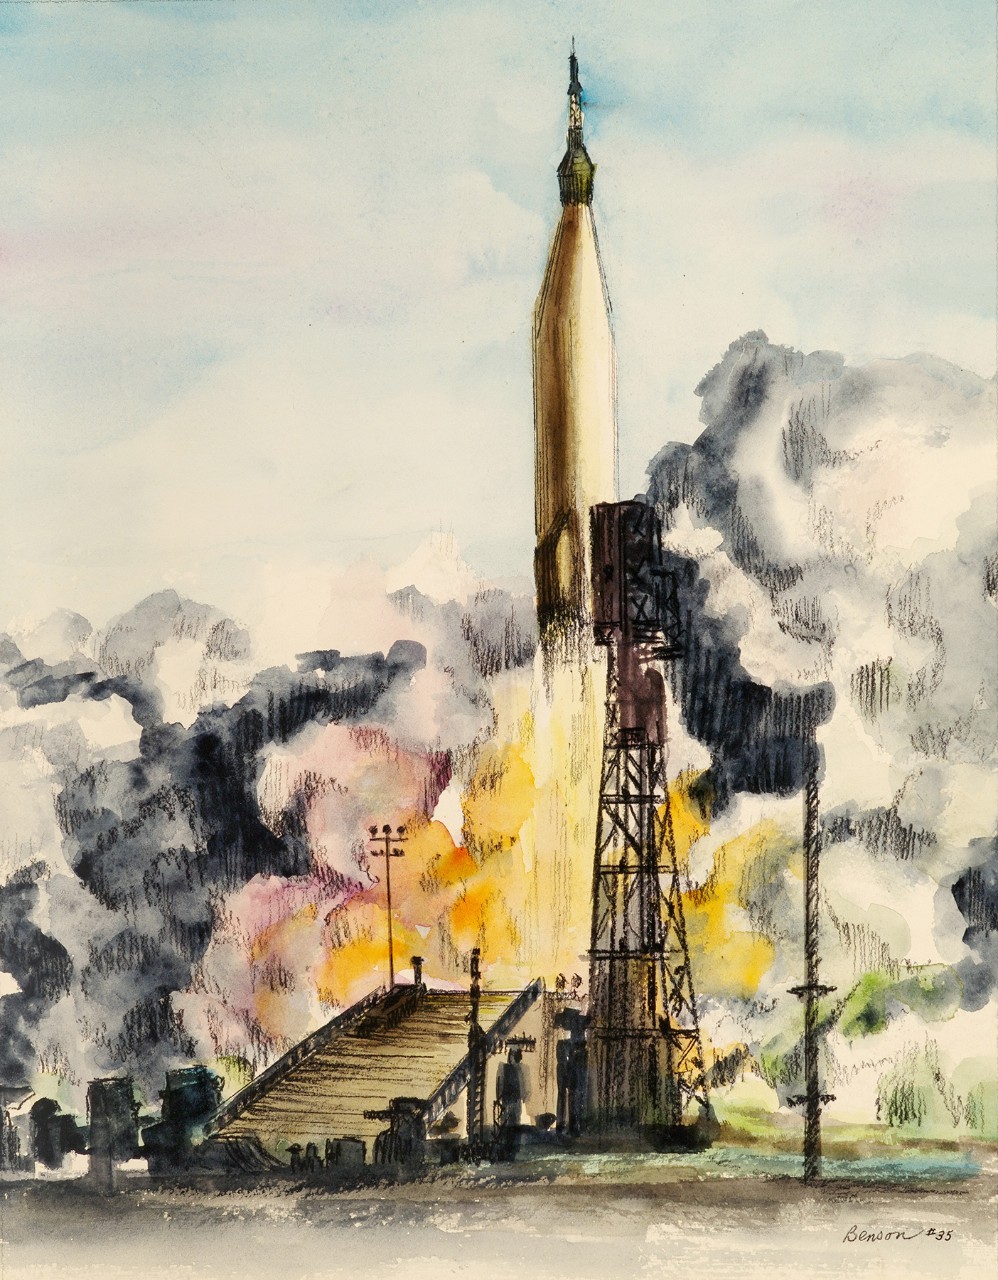 Mercury Space Program, Blast off from Cape Canaveral with Astronaut in Space Capsule, 1963:  88-170-AI